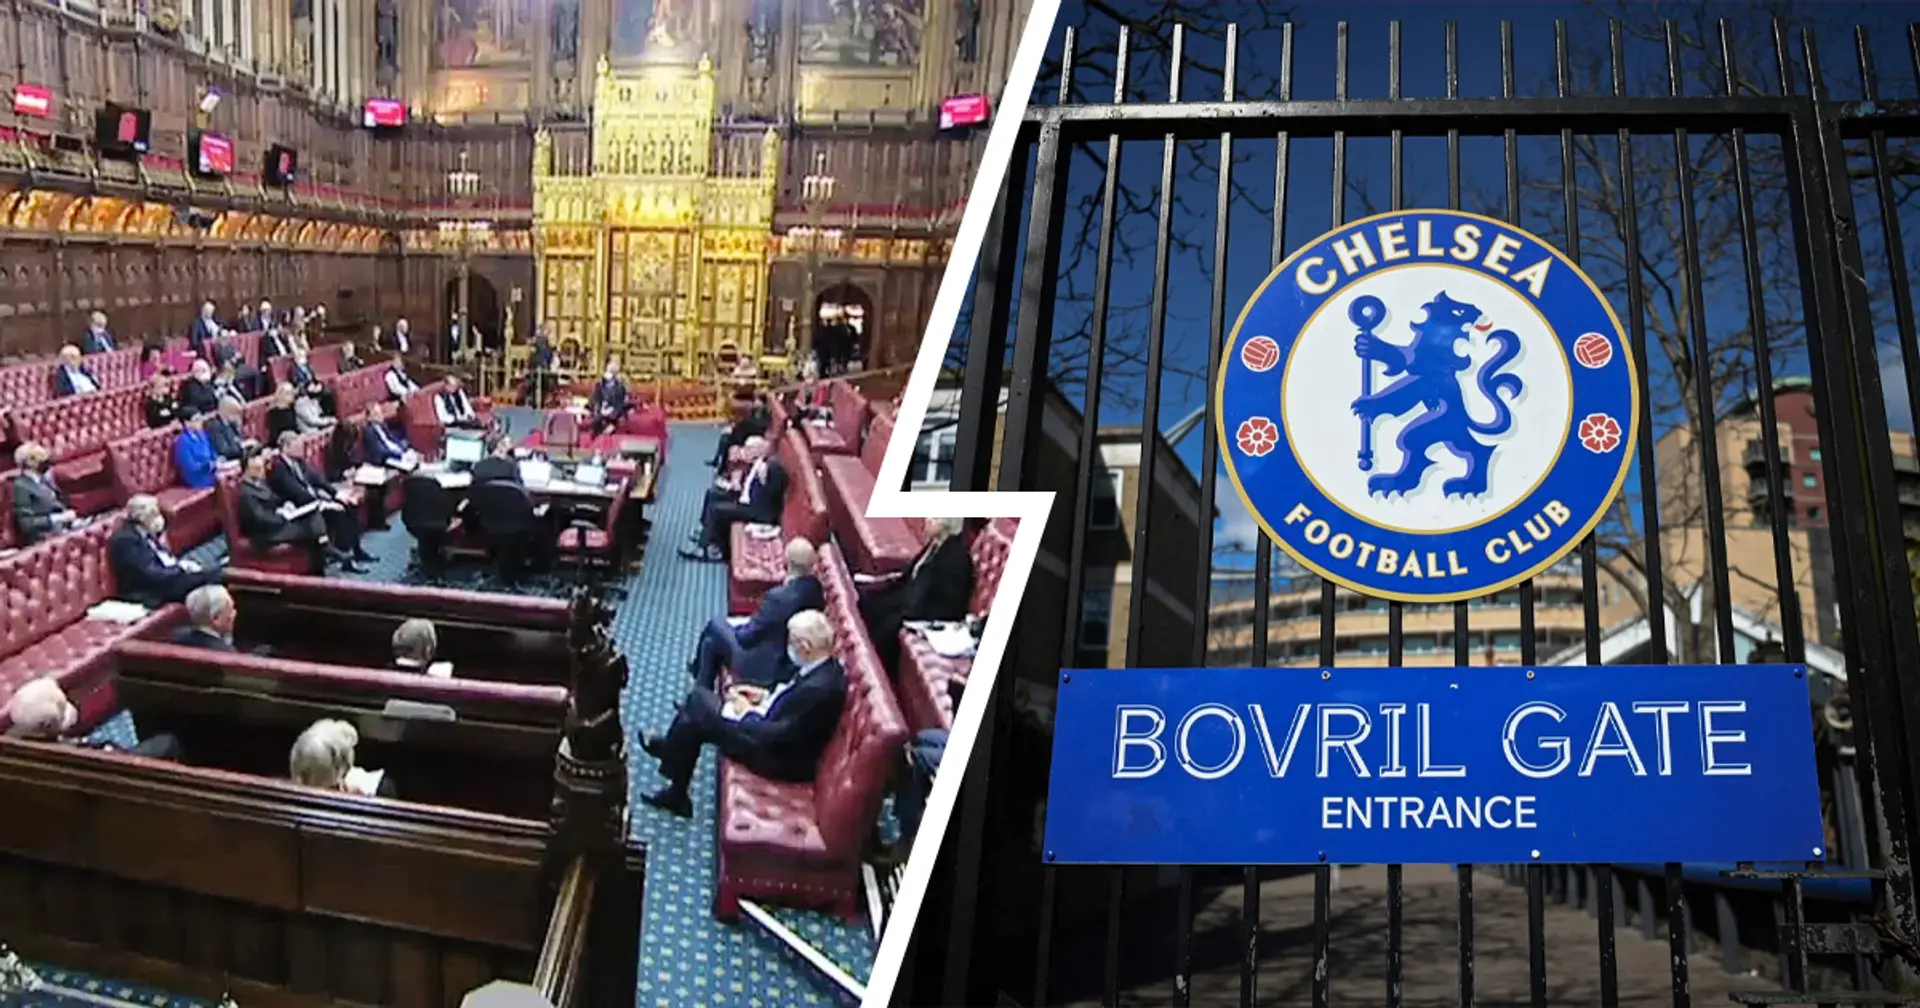 UK Parliament urged to throw out one of final bidders for Chelsea - it's not Ricketts family